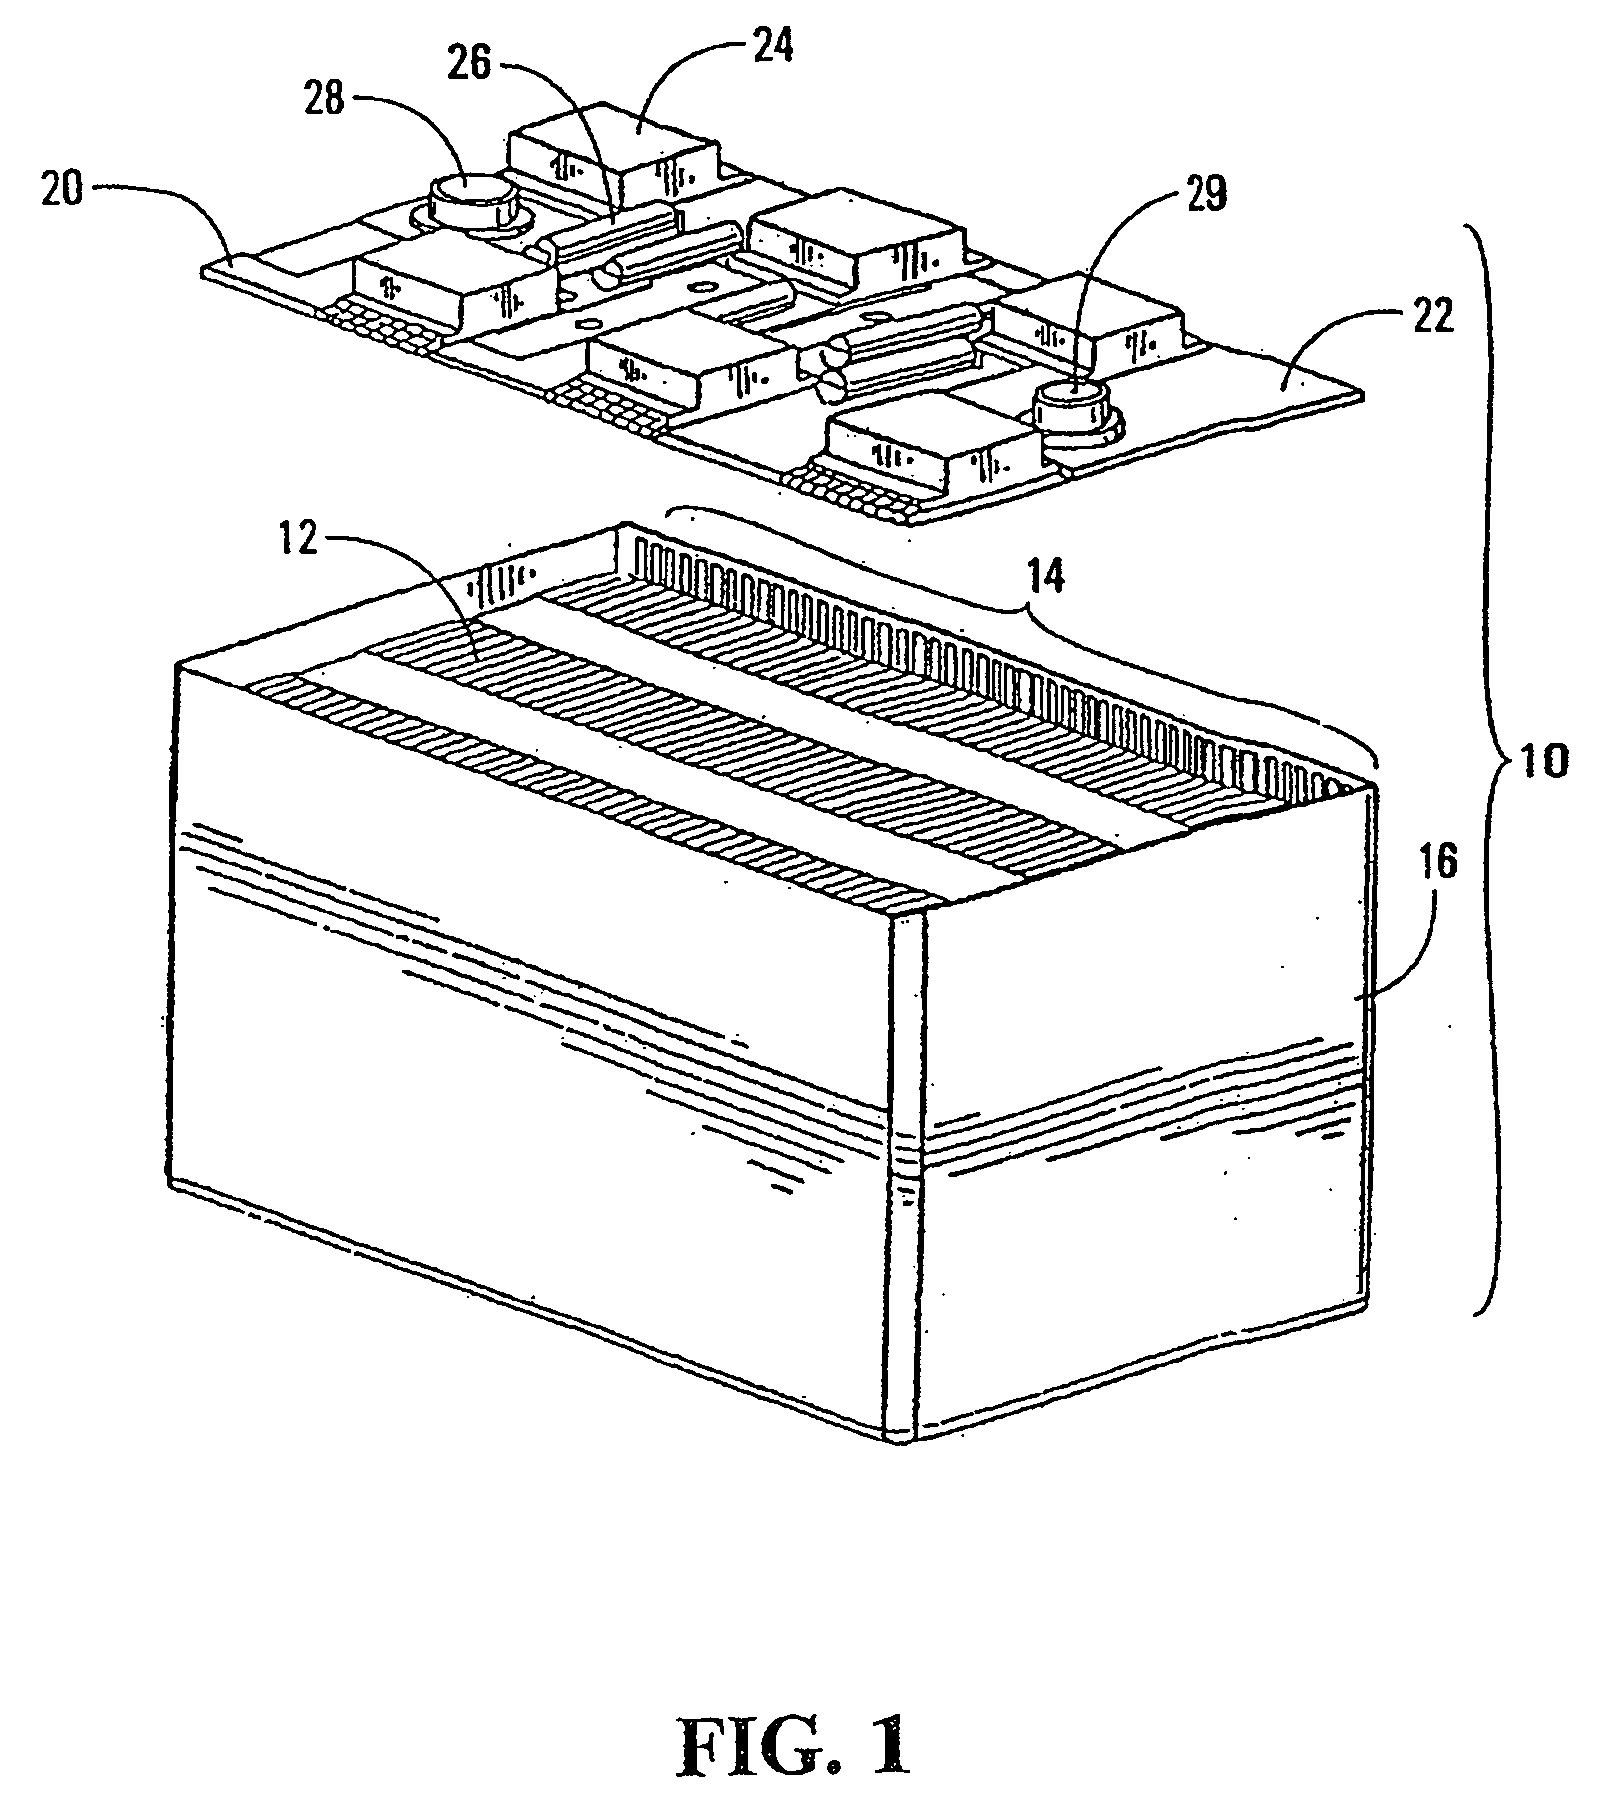 Self-diagnosis system for an energy storage device